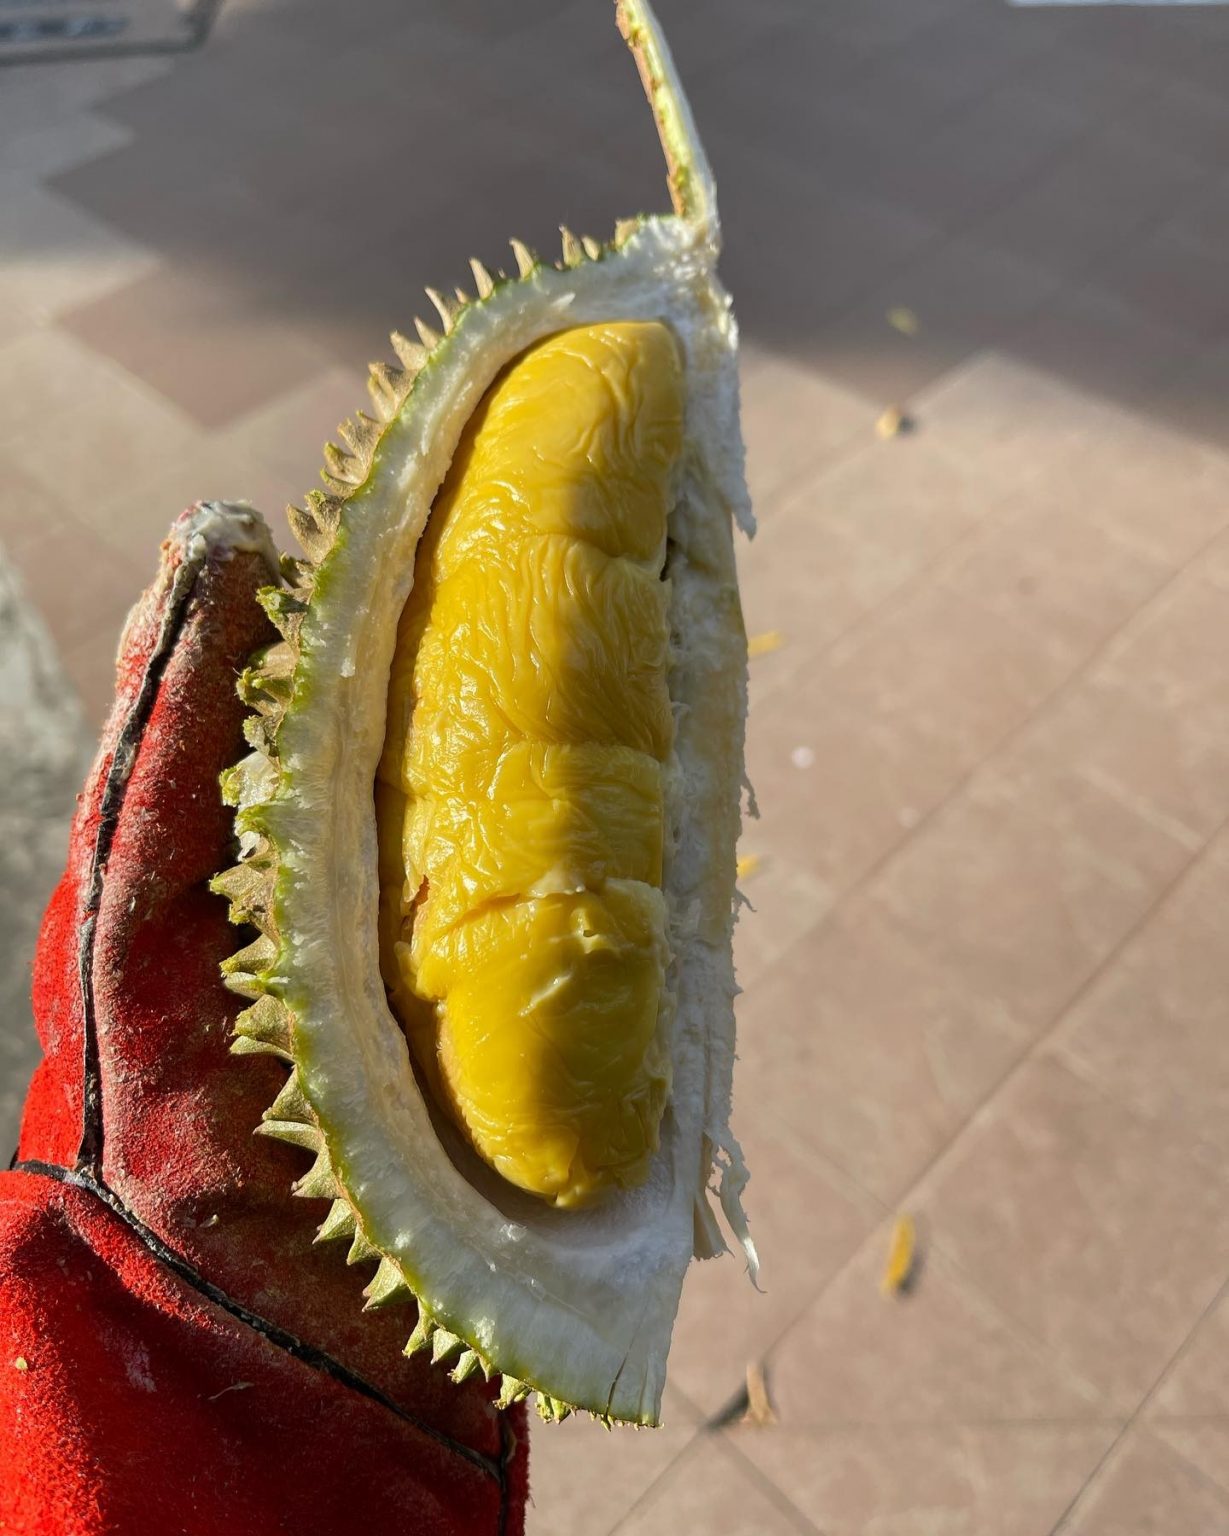 It's durian season in Singapore. What should you pick? HungryGoWhere